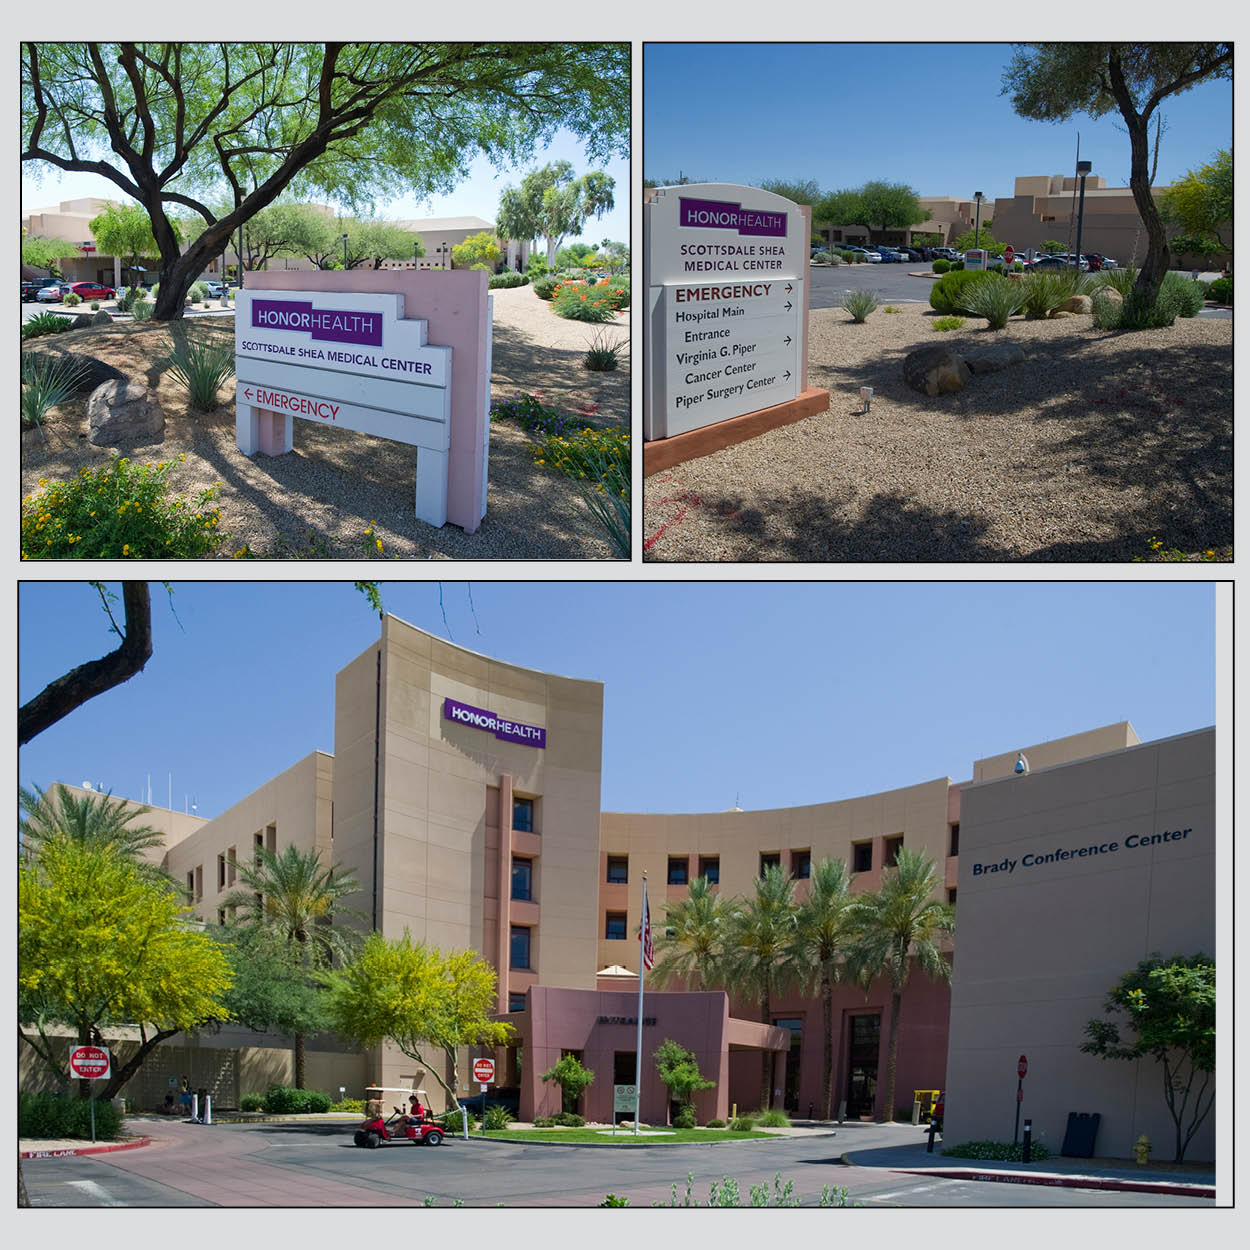 HonorHealth Scottsdale Shea Medical Center  100 Hospitals with Great 